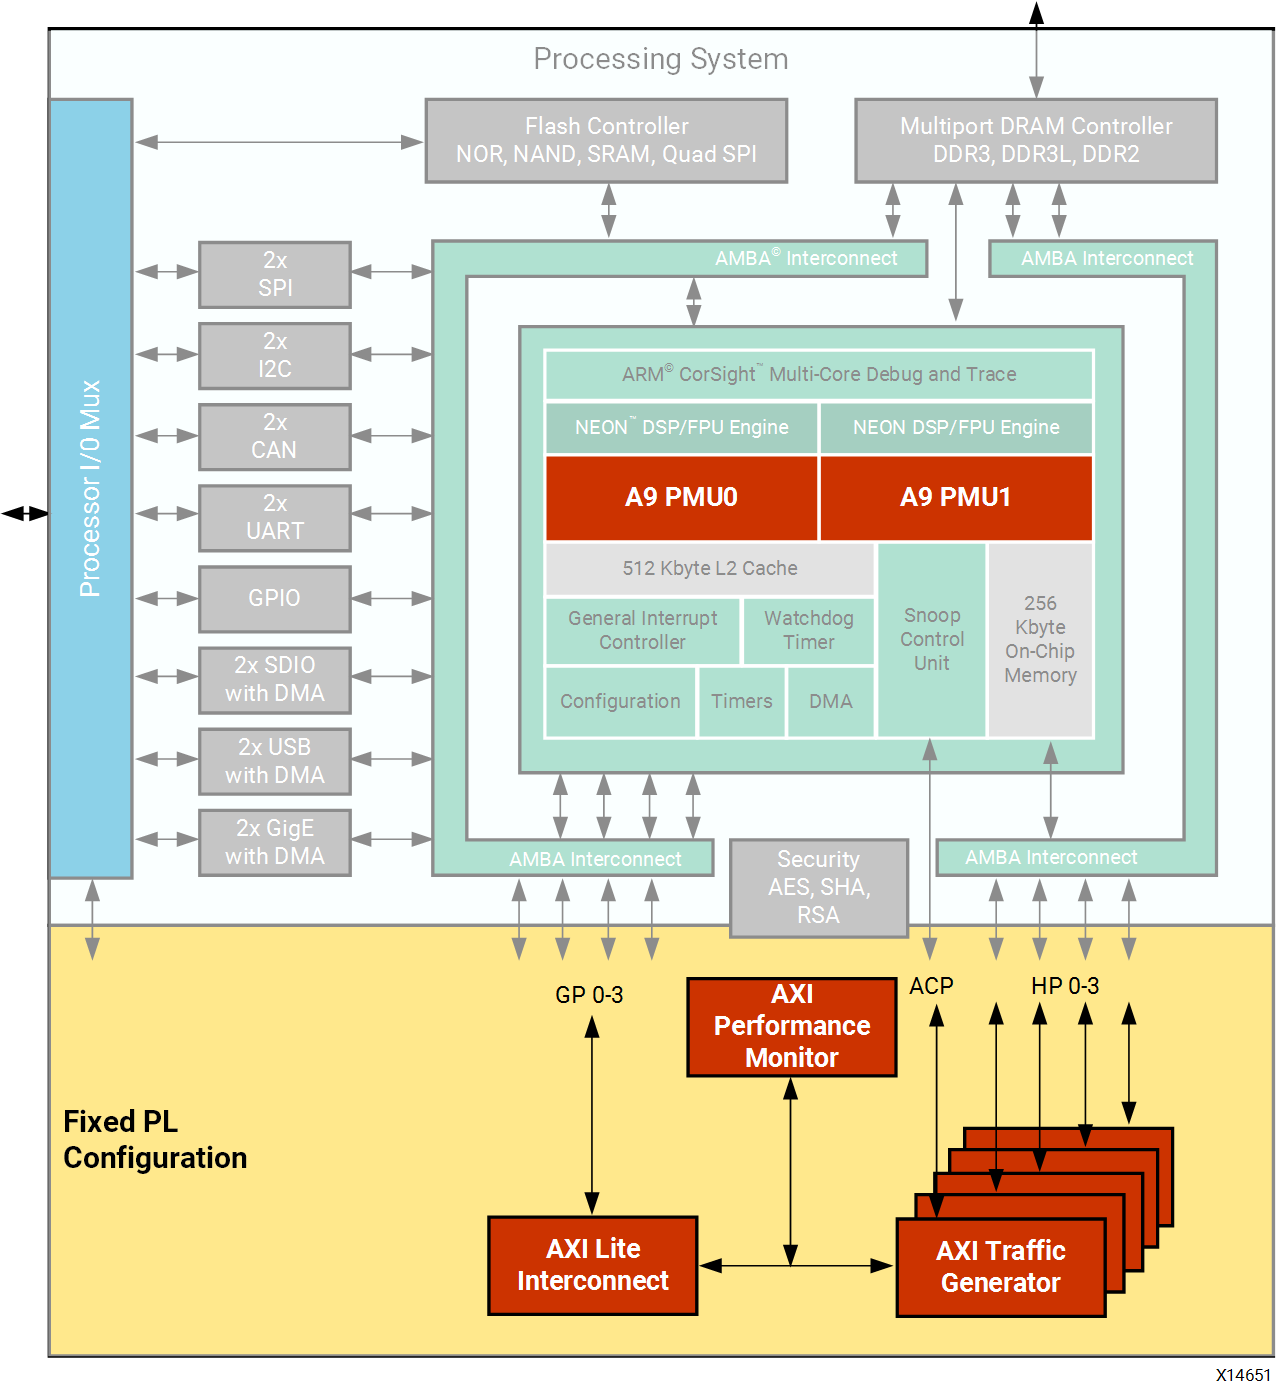 ../../../../_images/x14651-Pre-Defined-SPM-Design-Zynq-7000-APSoC.png